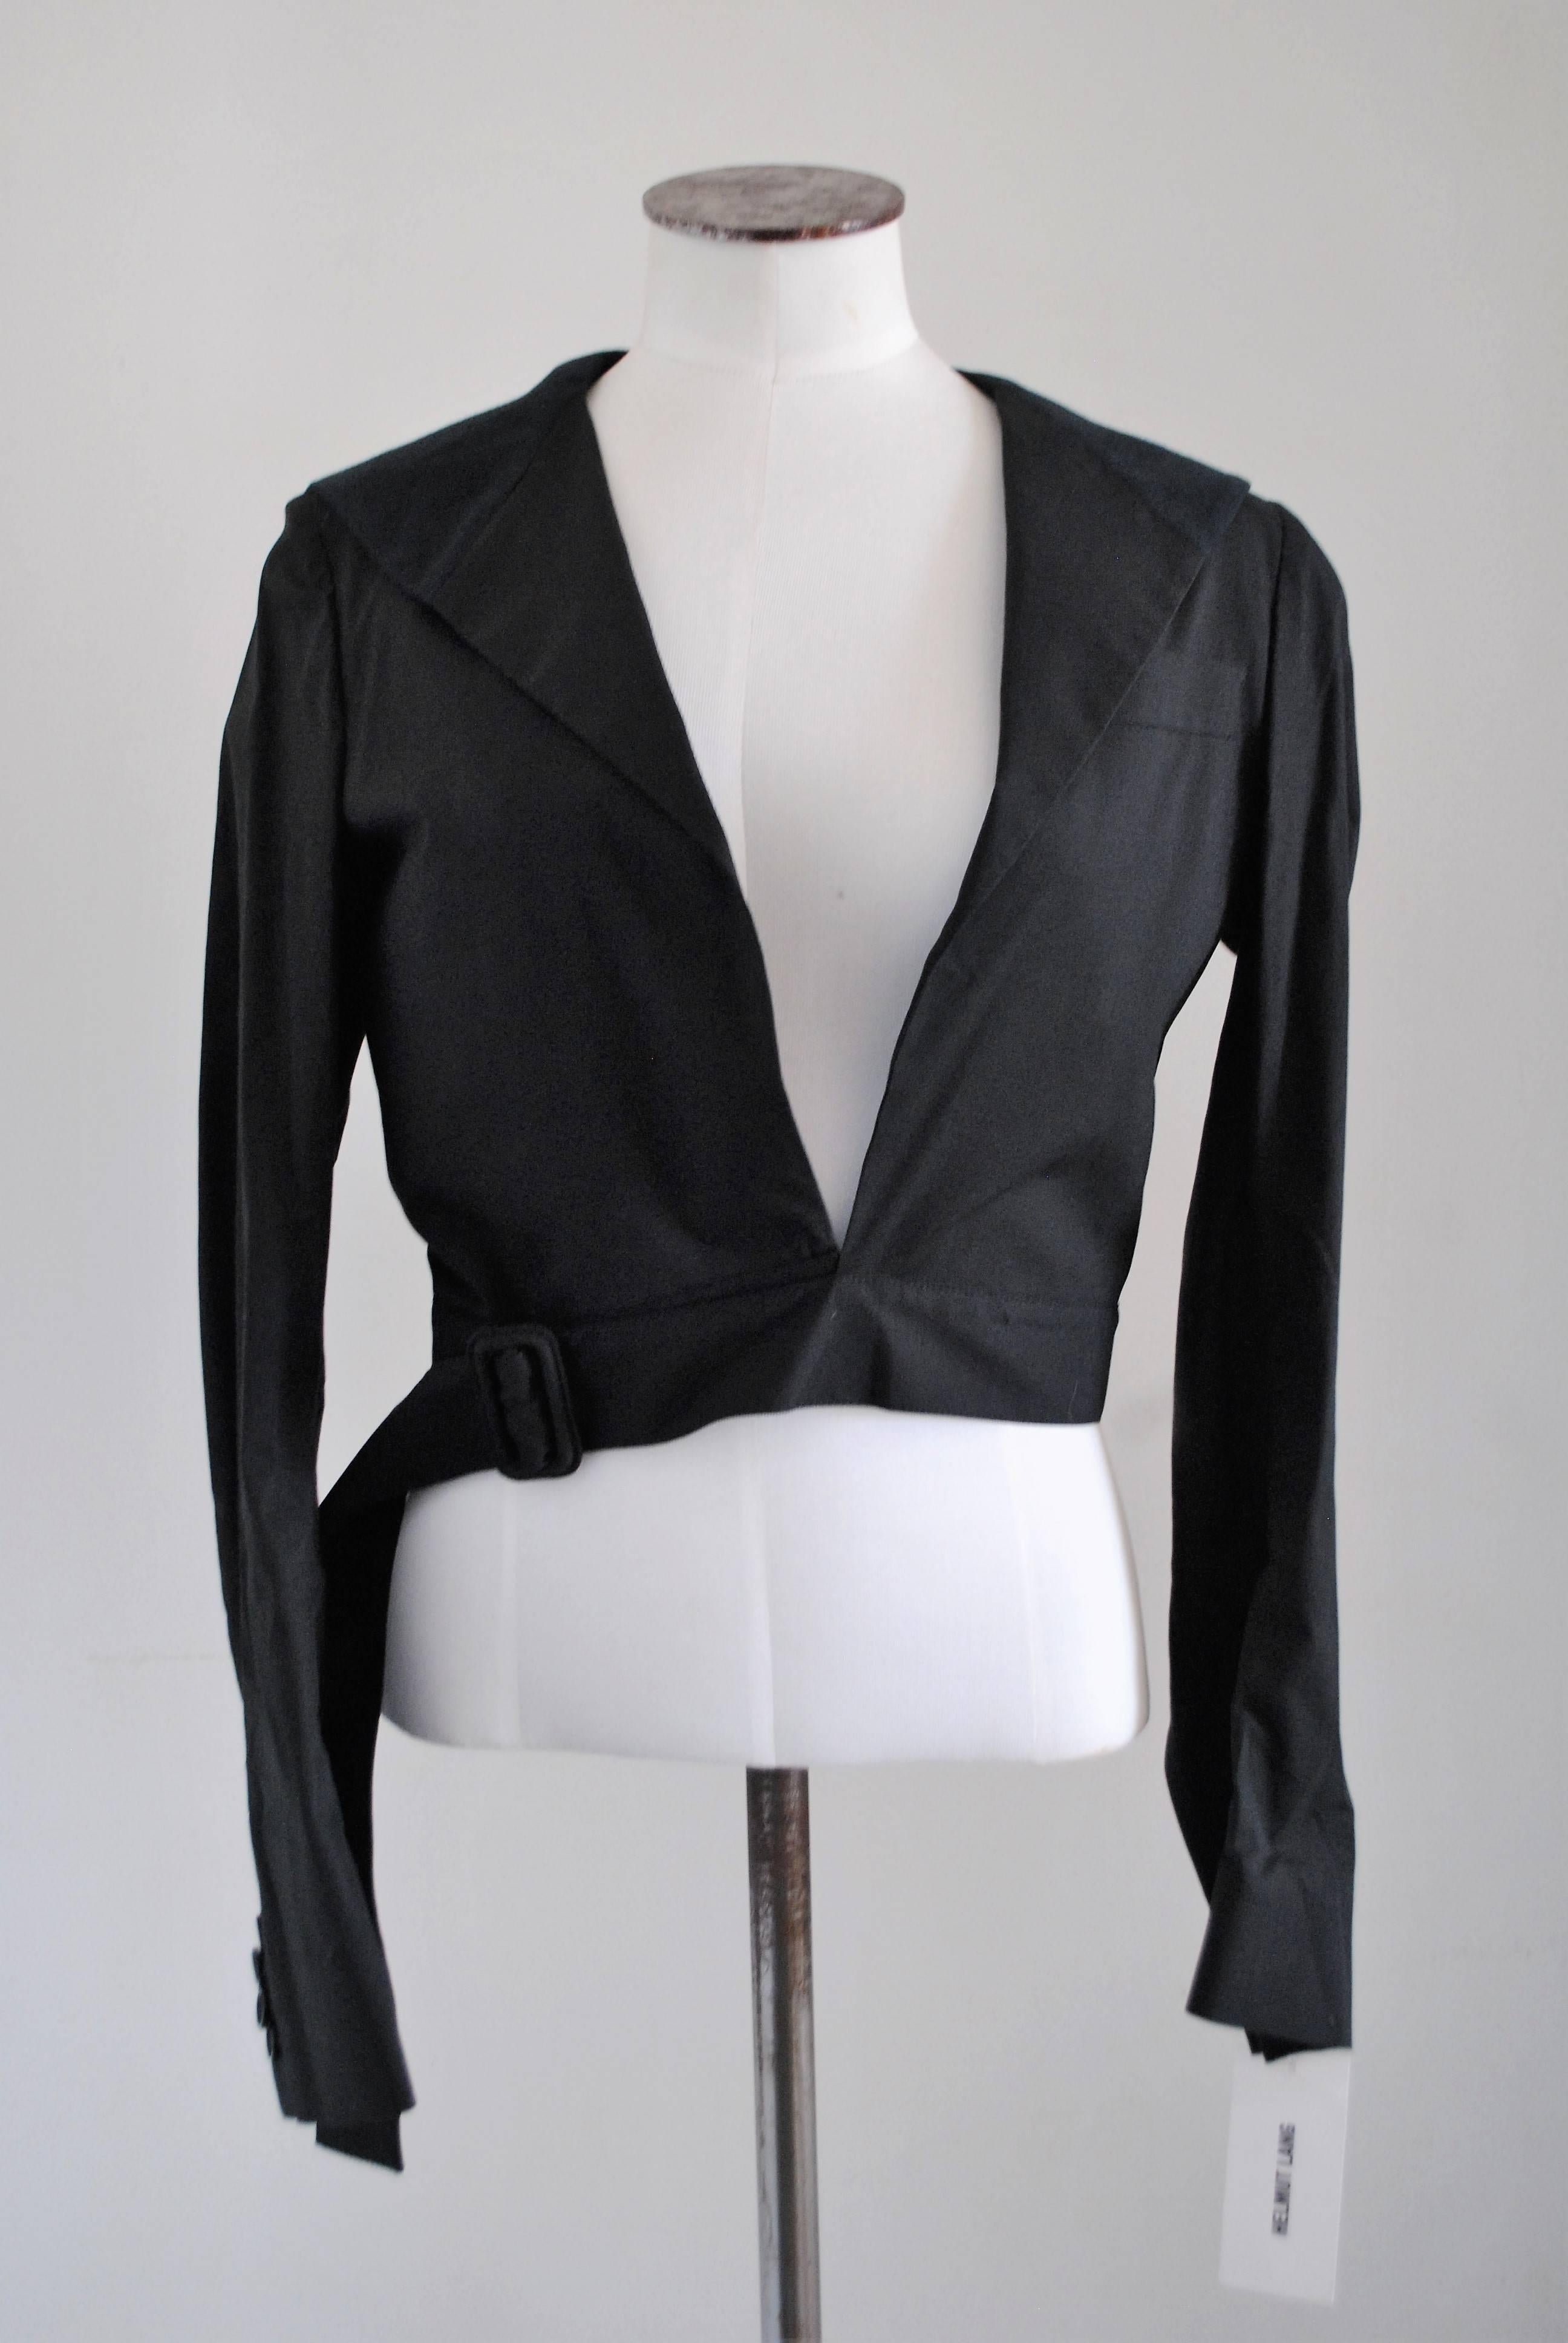 Helmut Lang Black jacket
Totally madce in italy in italian size range 40
Composition: Cotton